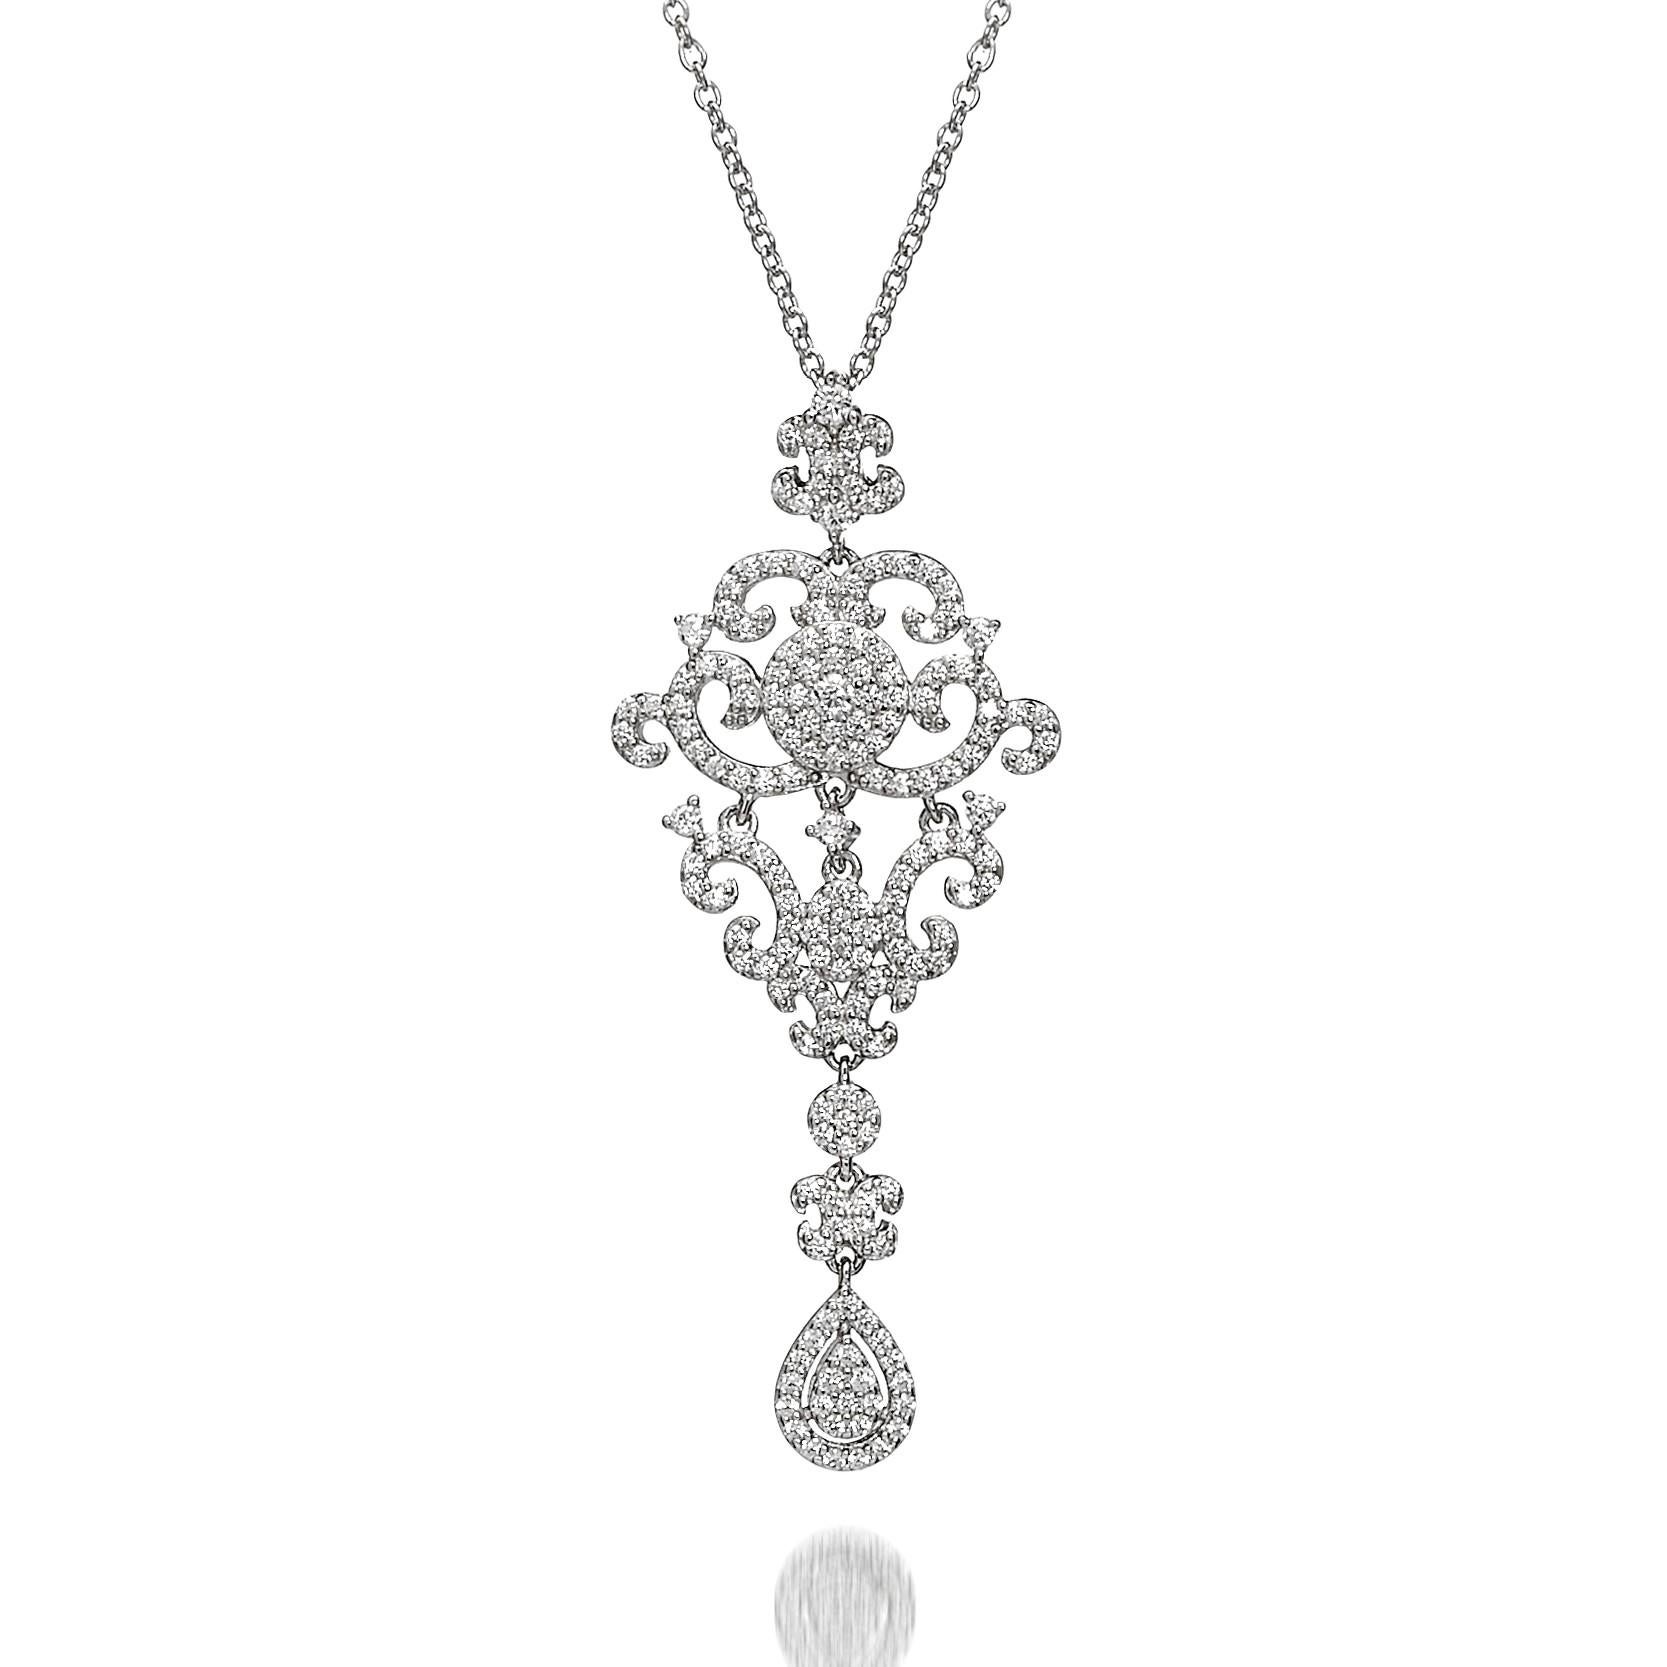 A truly exquisite, delicate lace filigree design pendant set with 1.86ct round brilliant cut cubic zirconia.

Composed of 925 sterling silver with white rhodium finish.

Chain measures 16ins with a 2ins extension.

Whether you're looking for a